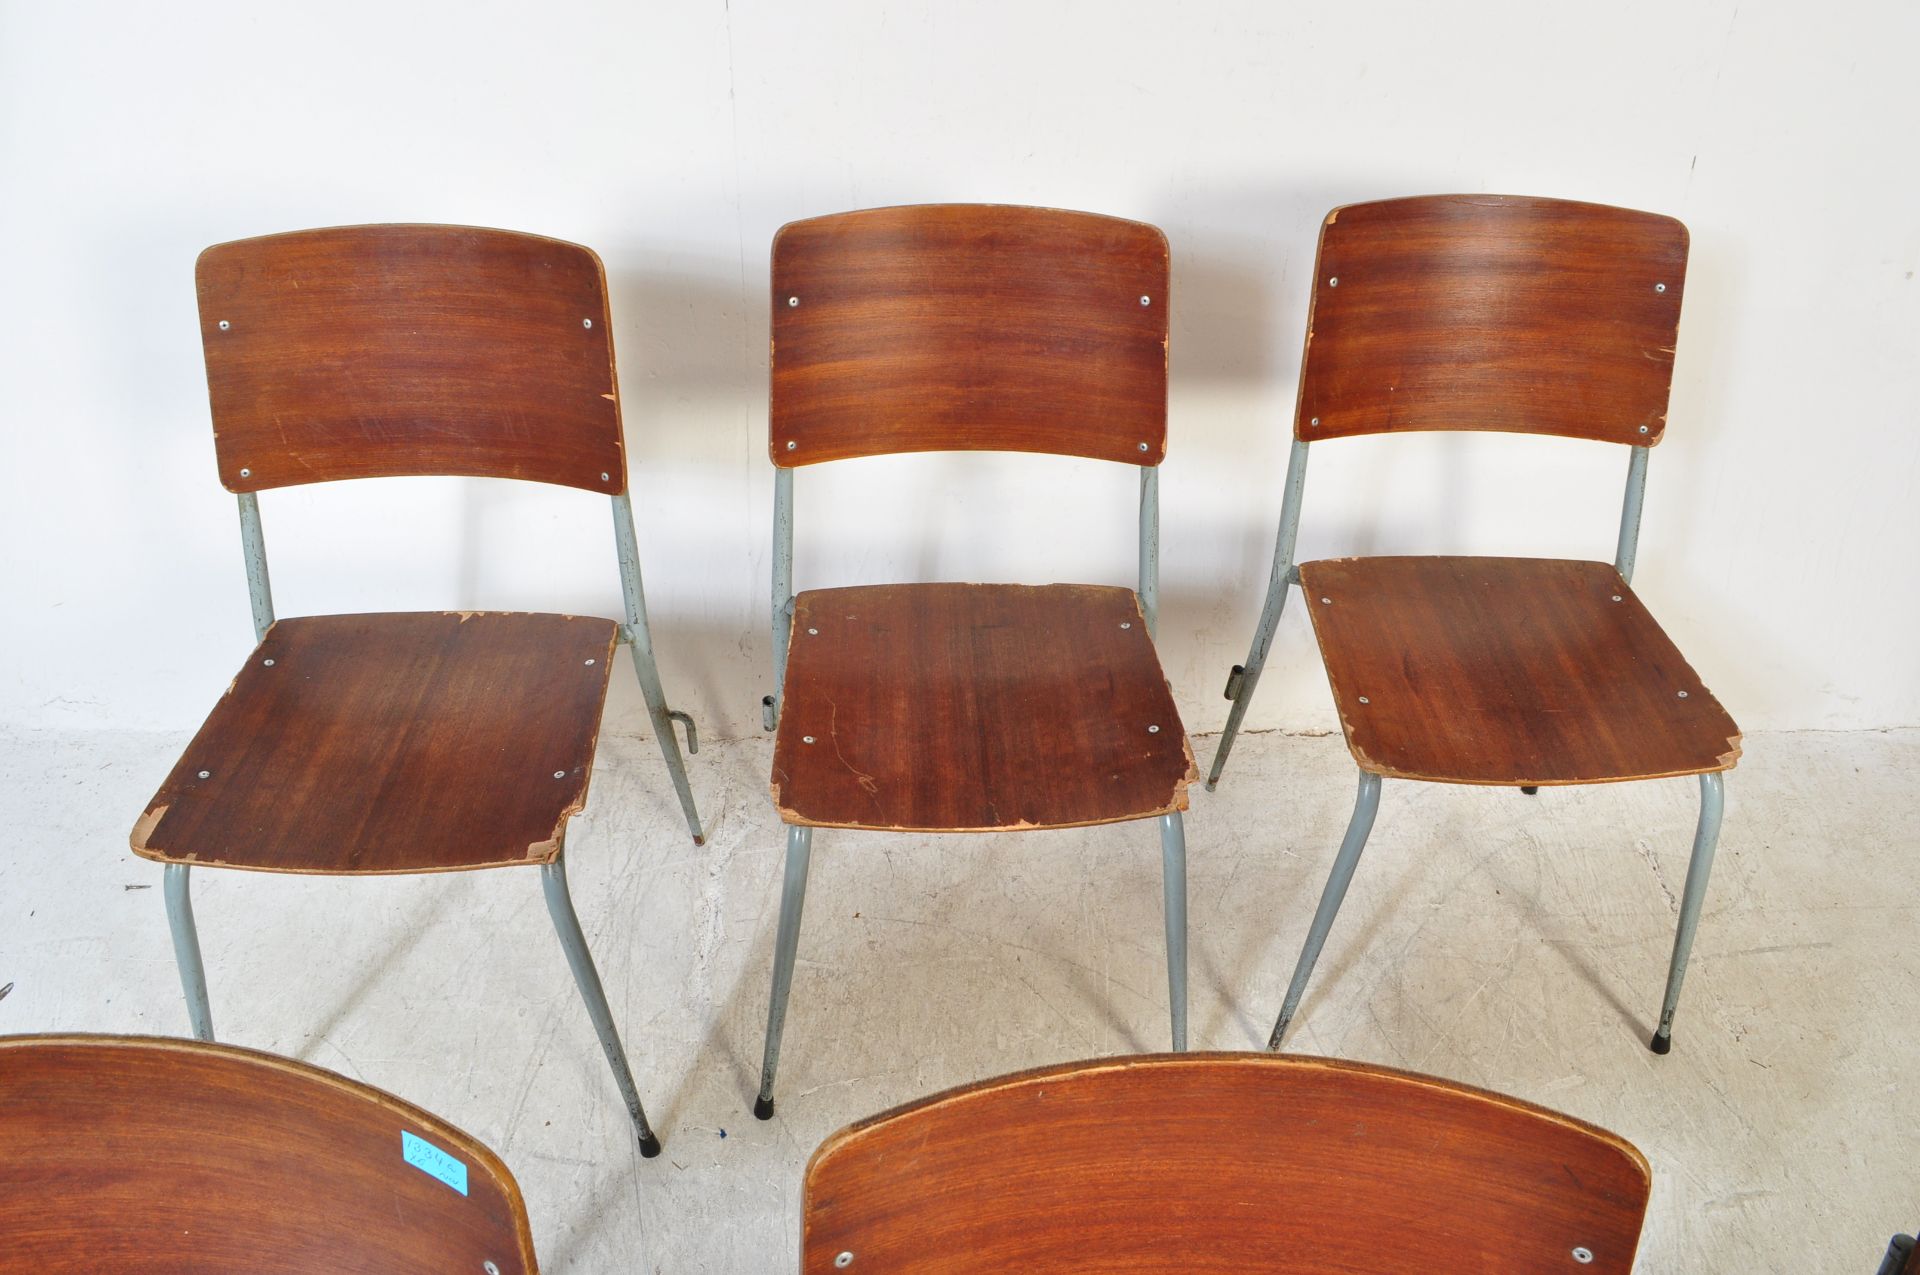 SIX VINTAGE INDUSTRIAL CAFE DINING CHAIRS - Image 3 of 4